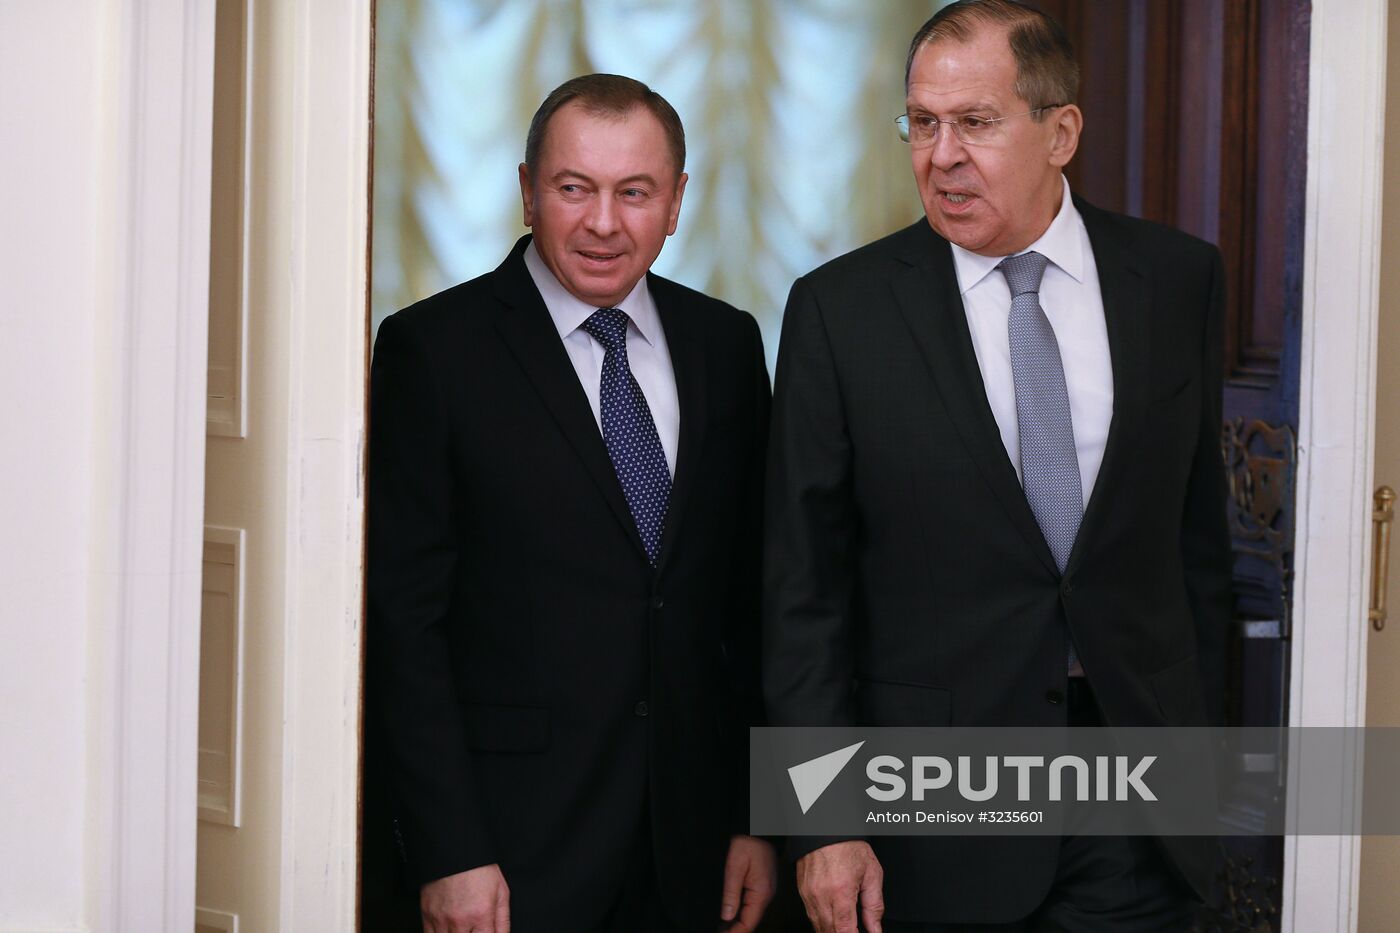 Meeting between Russian and Belarusian foreign ministers